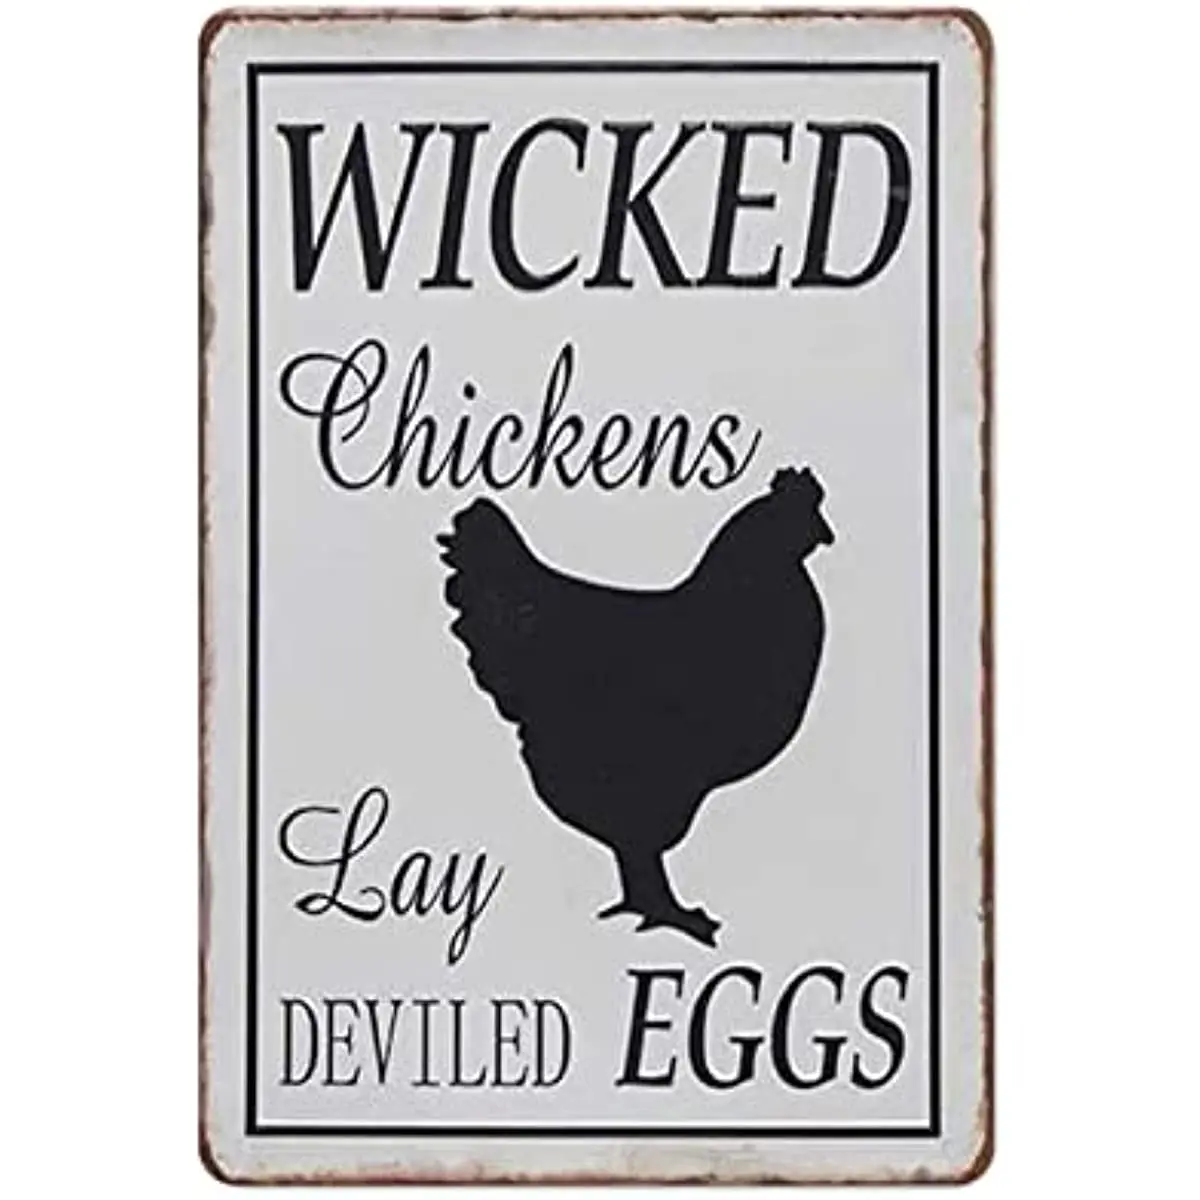 

New Metal Tin Sign Vintage Wicked Chickens Lay Deviled Eggs Chic Garage House for Home, Living Room, Garden, Bedroom